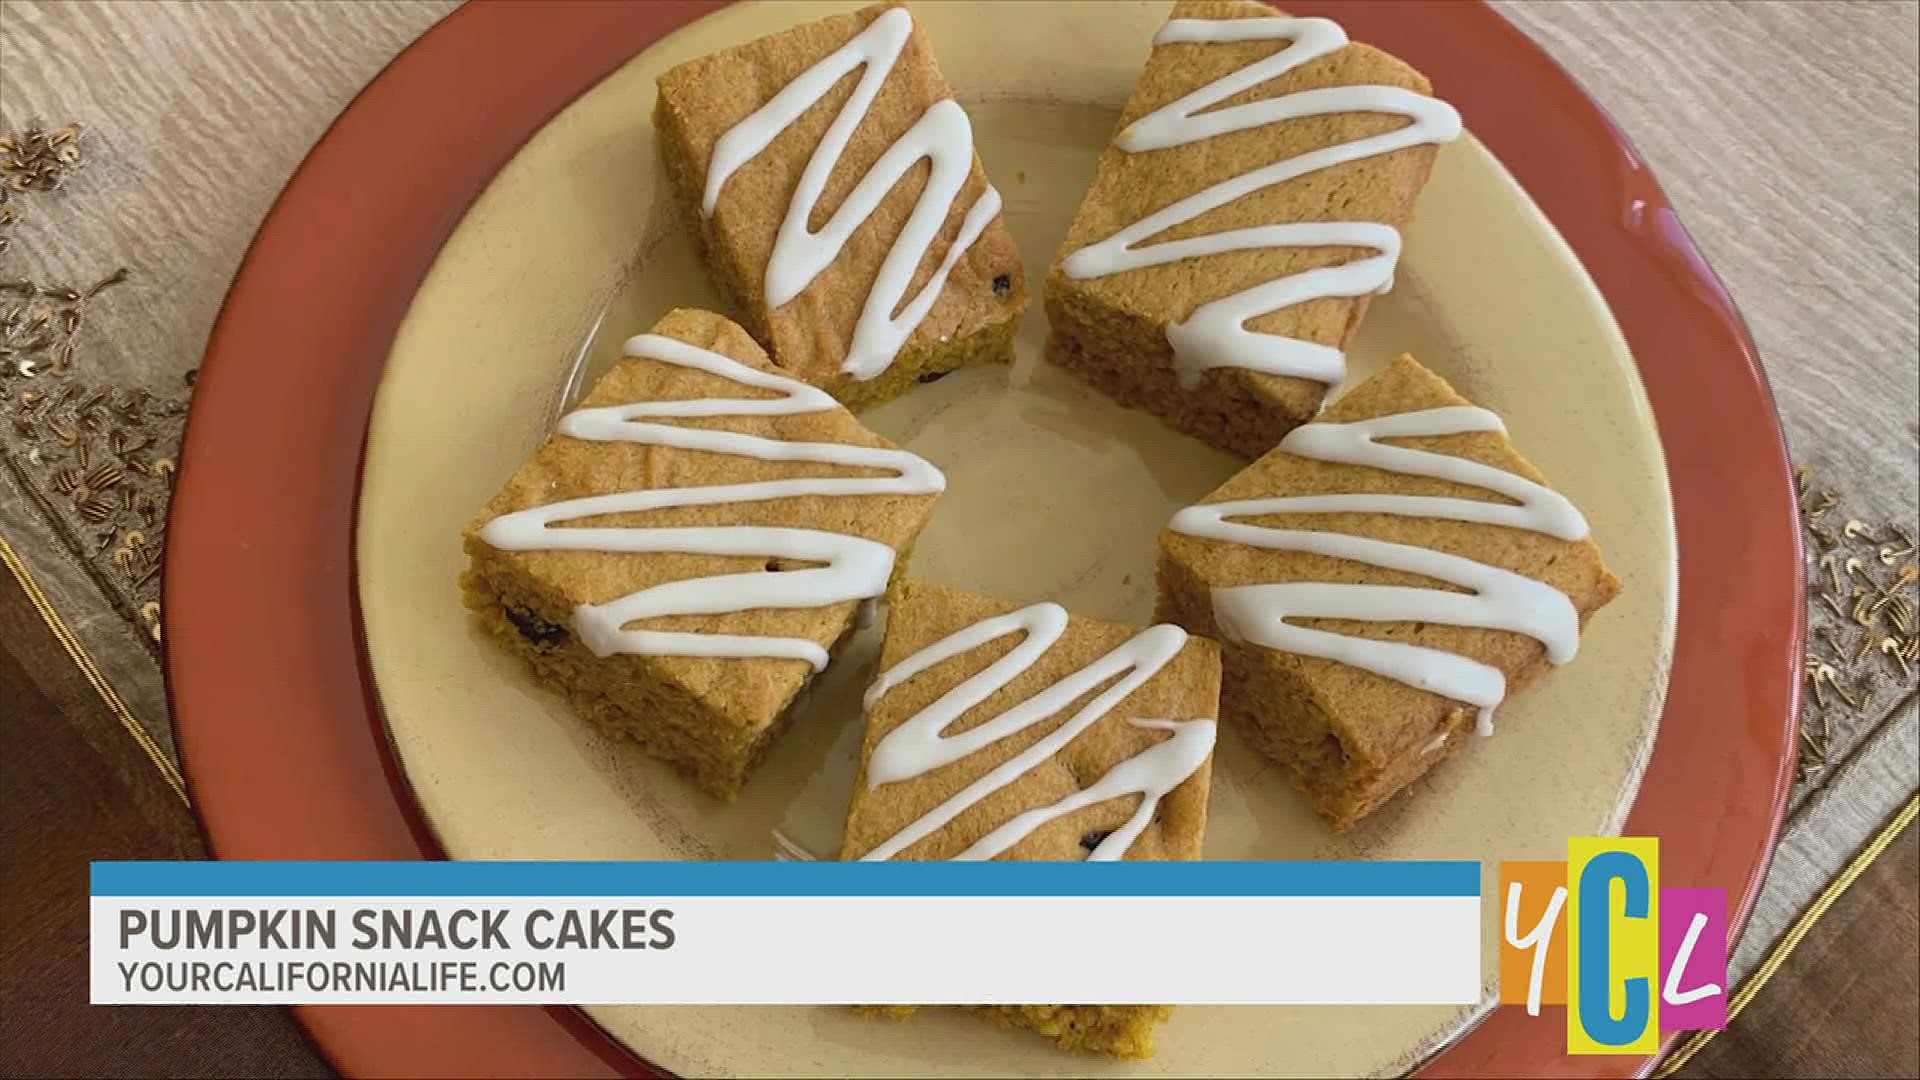 Start off the season with a pumpkin spice inspired recipe. Celebrity Chef, Christy Rost, gives us the details on her pumpkin snack cakes.